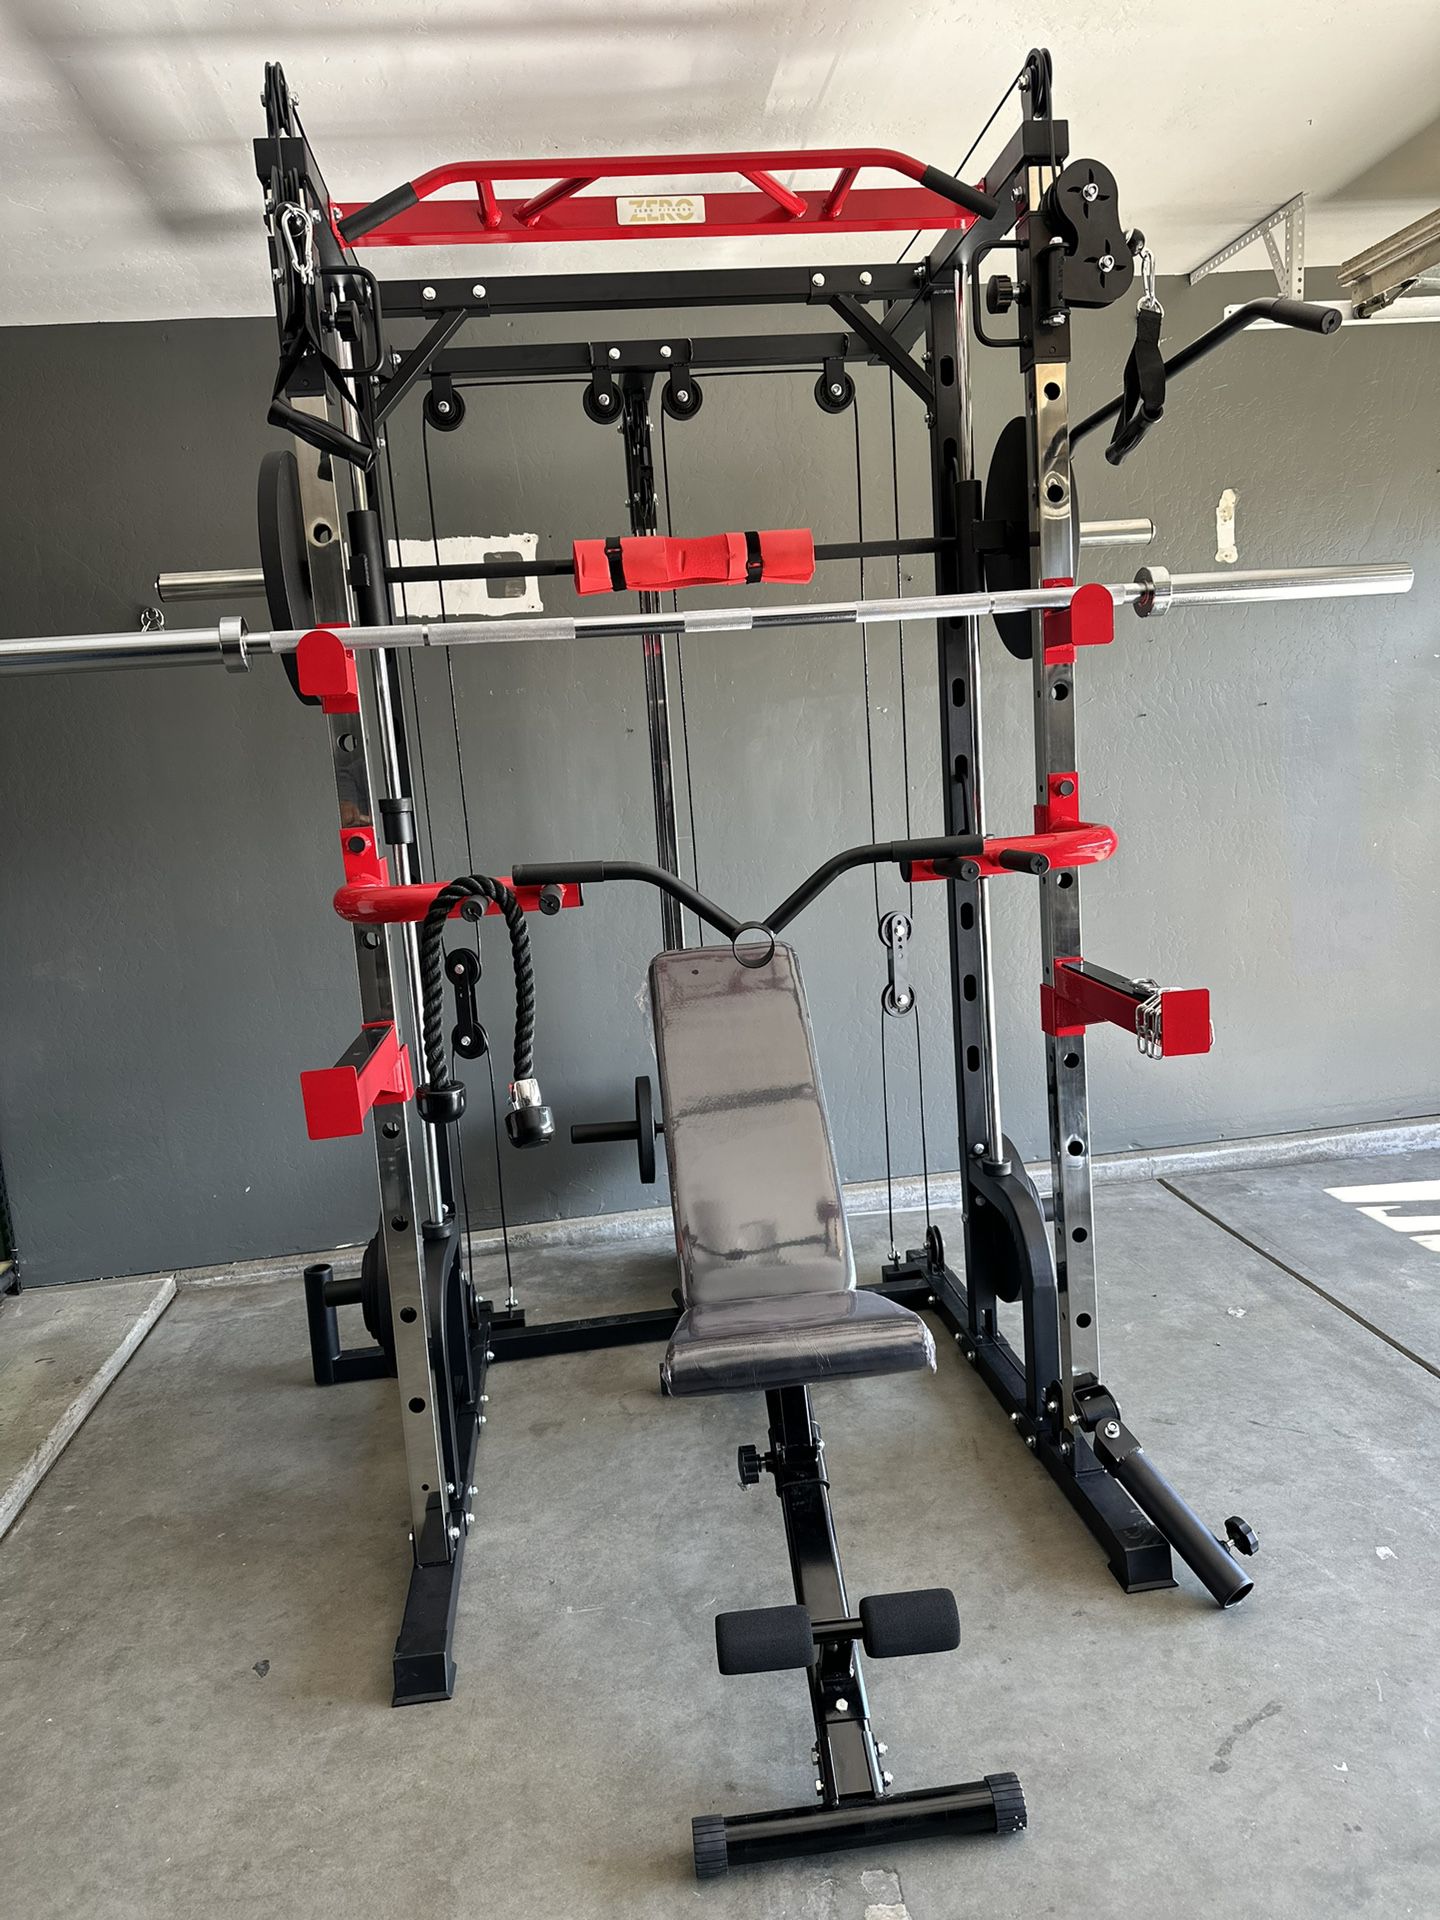 Smith Machine 100 | Adjustable Bench | 245lb Cast Iron Olympic Weights | 7ft Olympic Bar | Fitness | Gym Equipment | FREE DELIVERY 🚚 